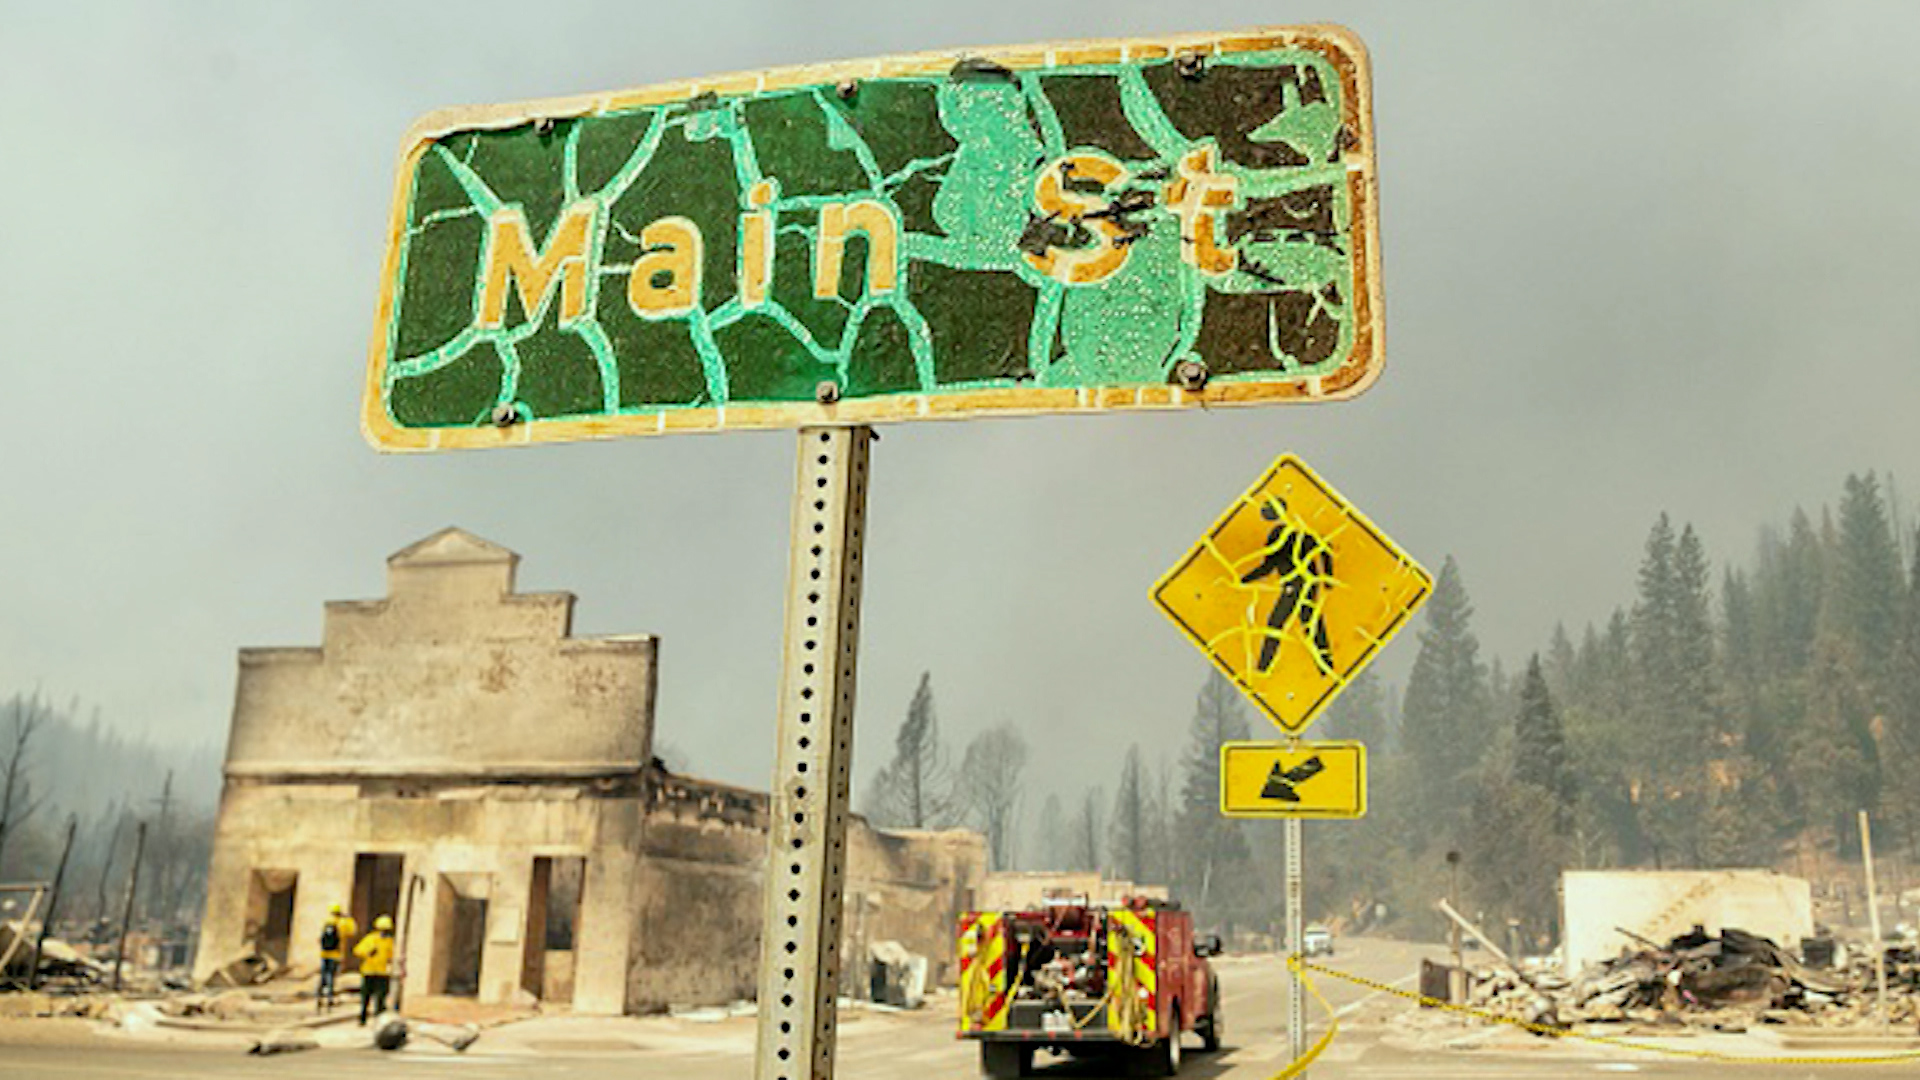 This distorted image shows a rundown mountain community with a firefighting crew present.